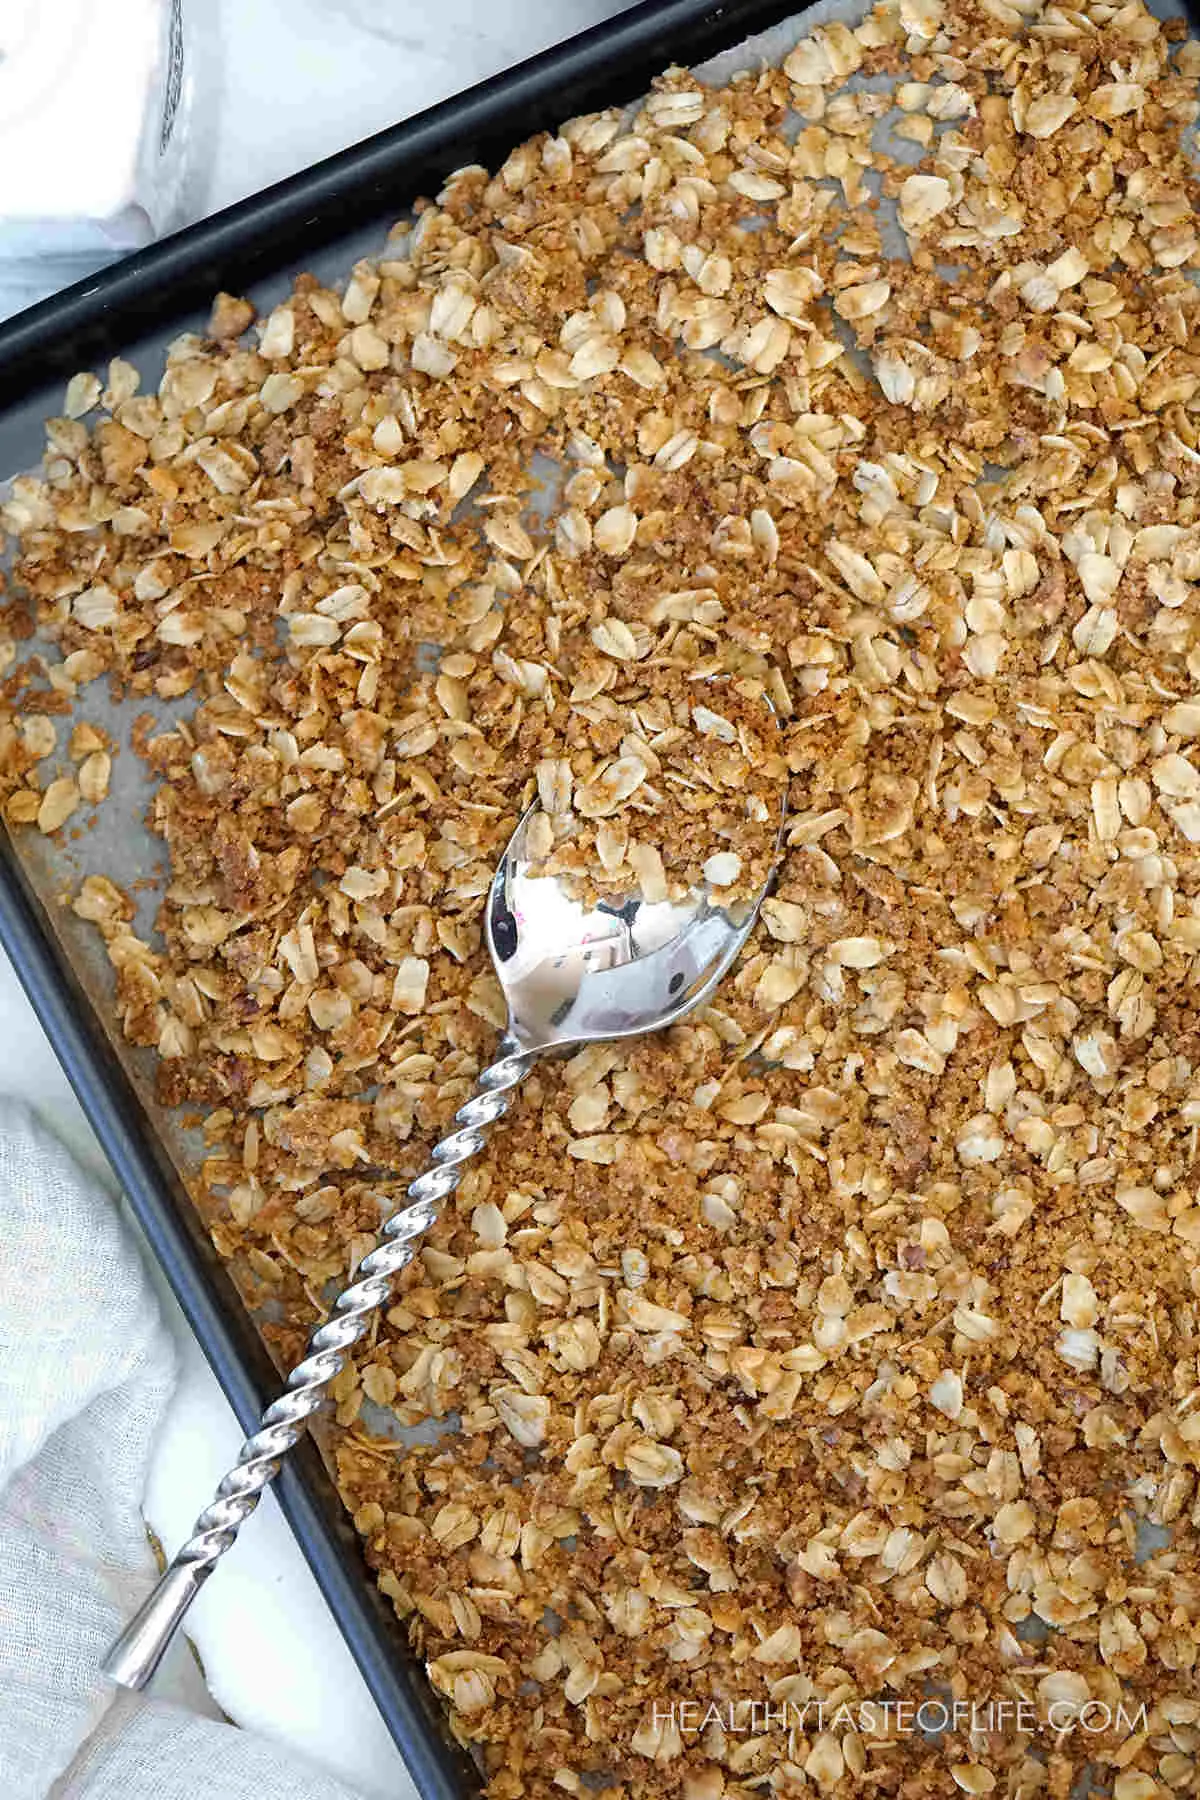 Oaty crumble topping.